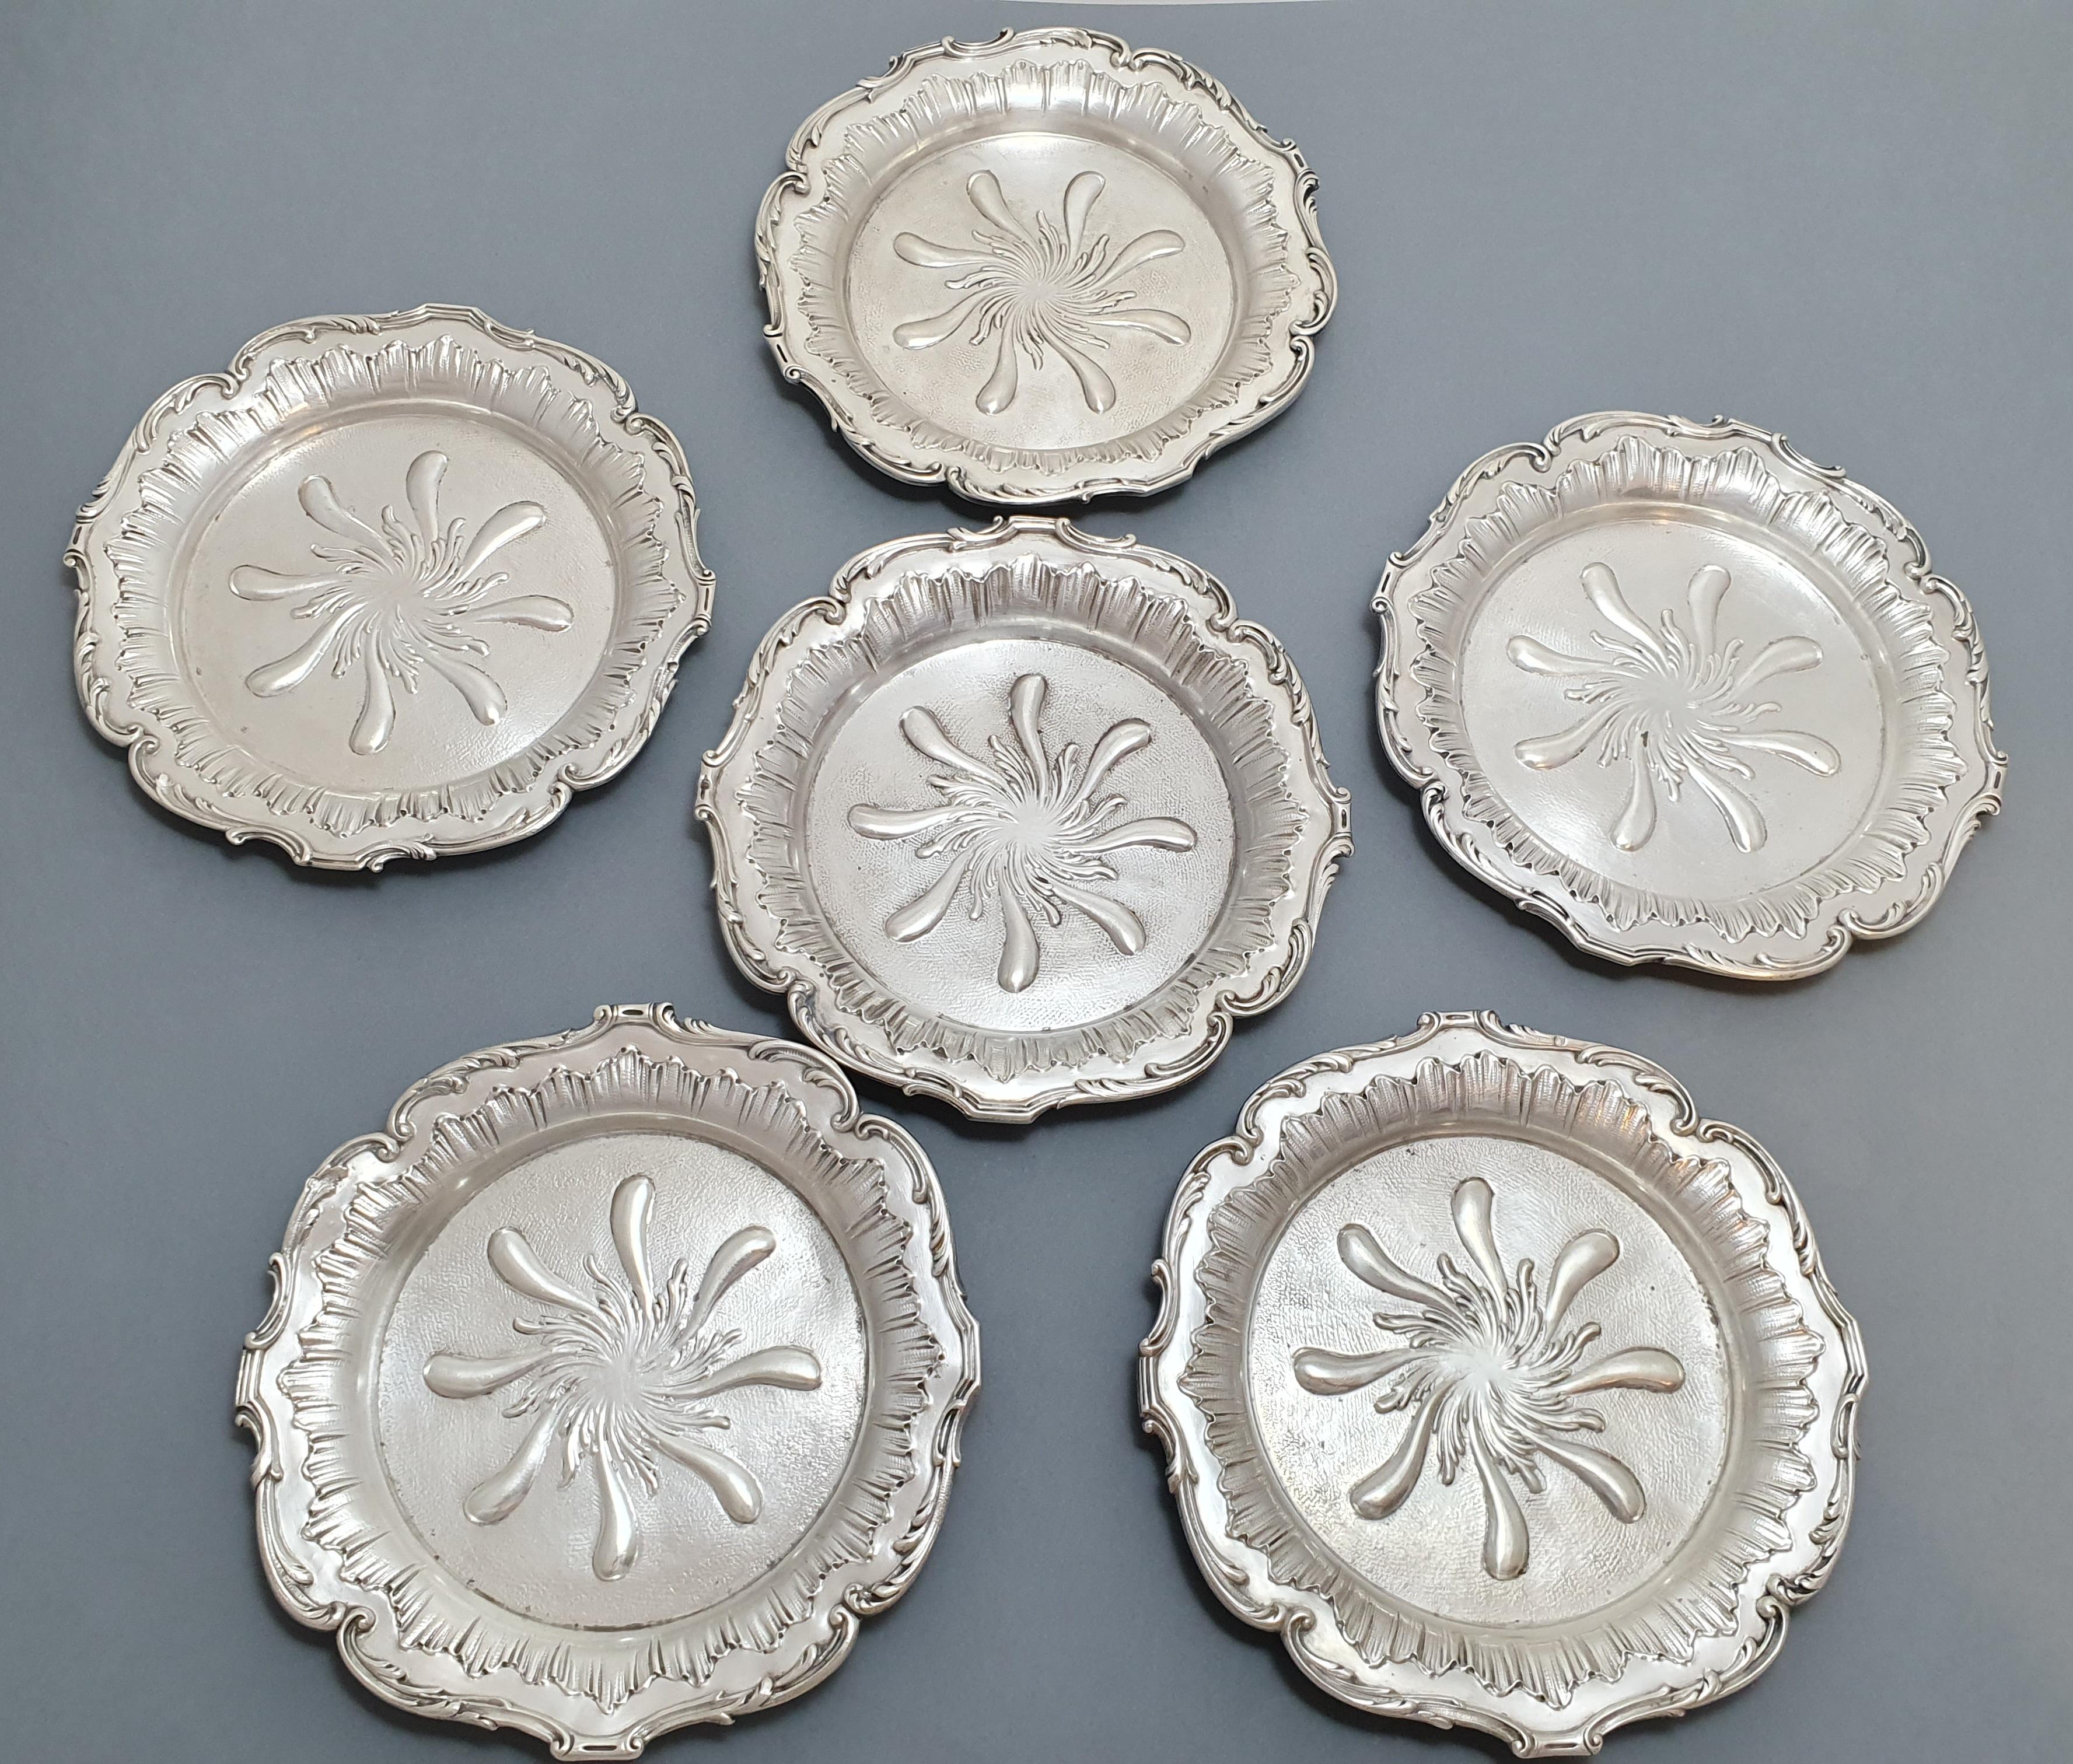 Beautiful set of 6 Sterling Silver bottle coasters from the 19th century 

Polylobed border, decorated with scrolls and foliage 
Hallmarked Minerva 1st title for 950/1000 purity silver 
Silversmith: Eugène Michaut, active between 1882 and 1896